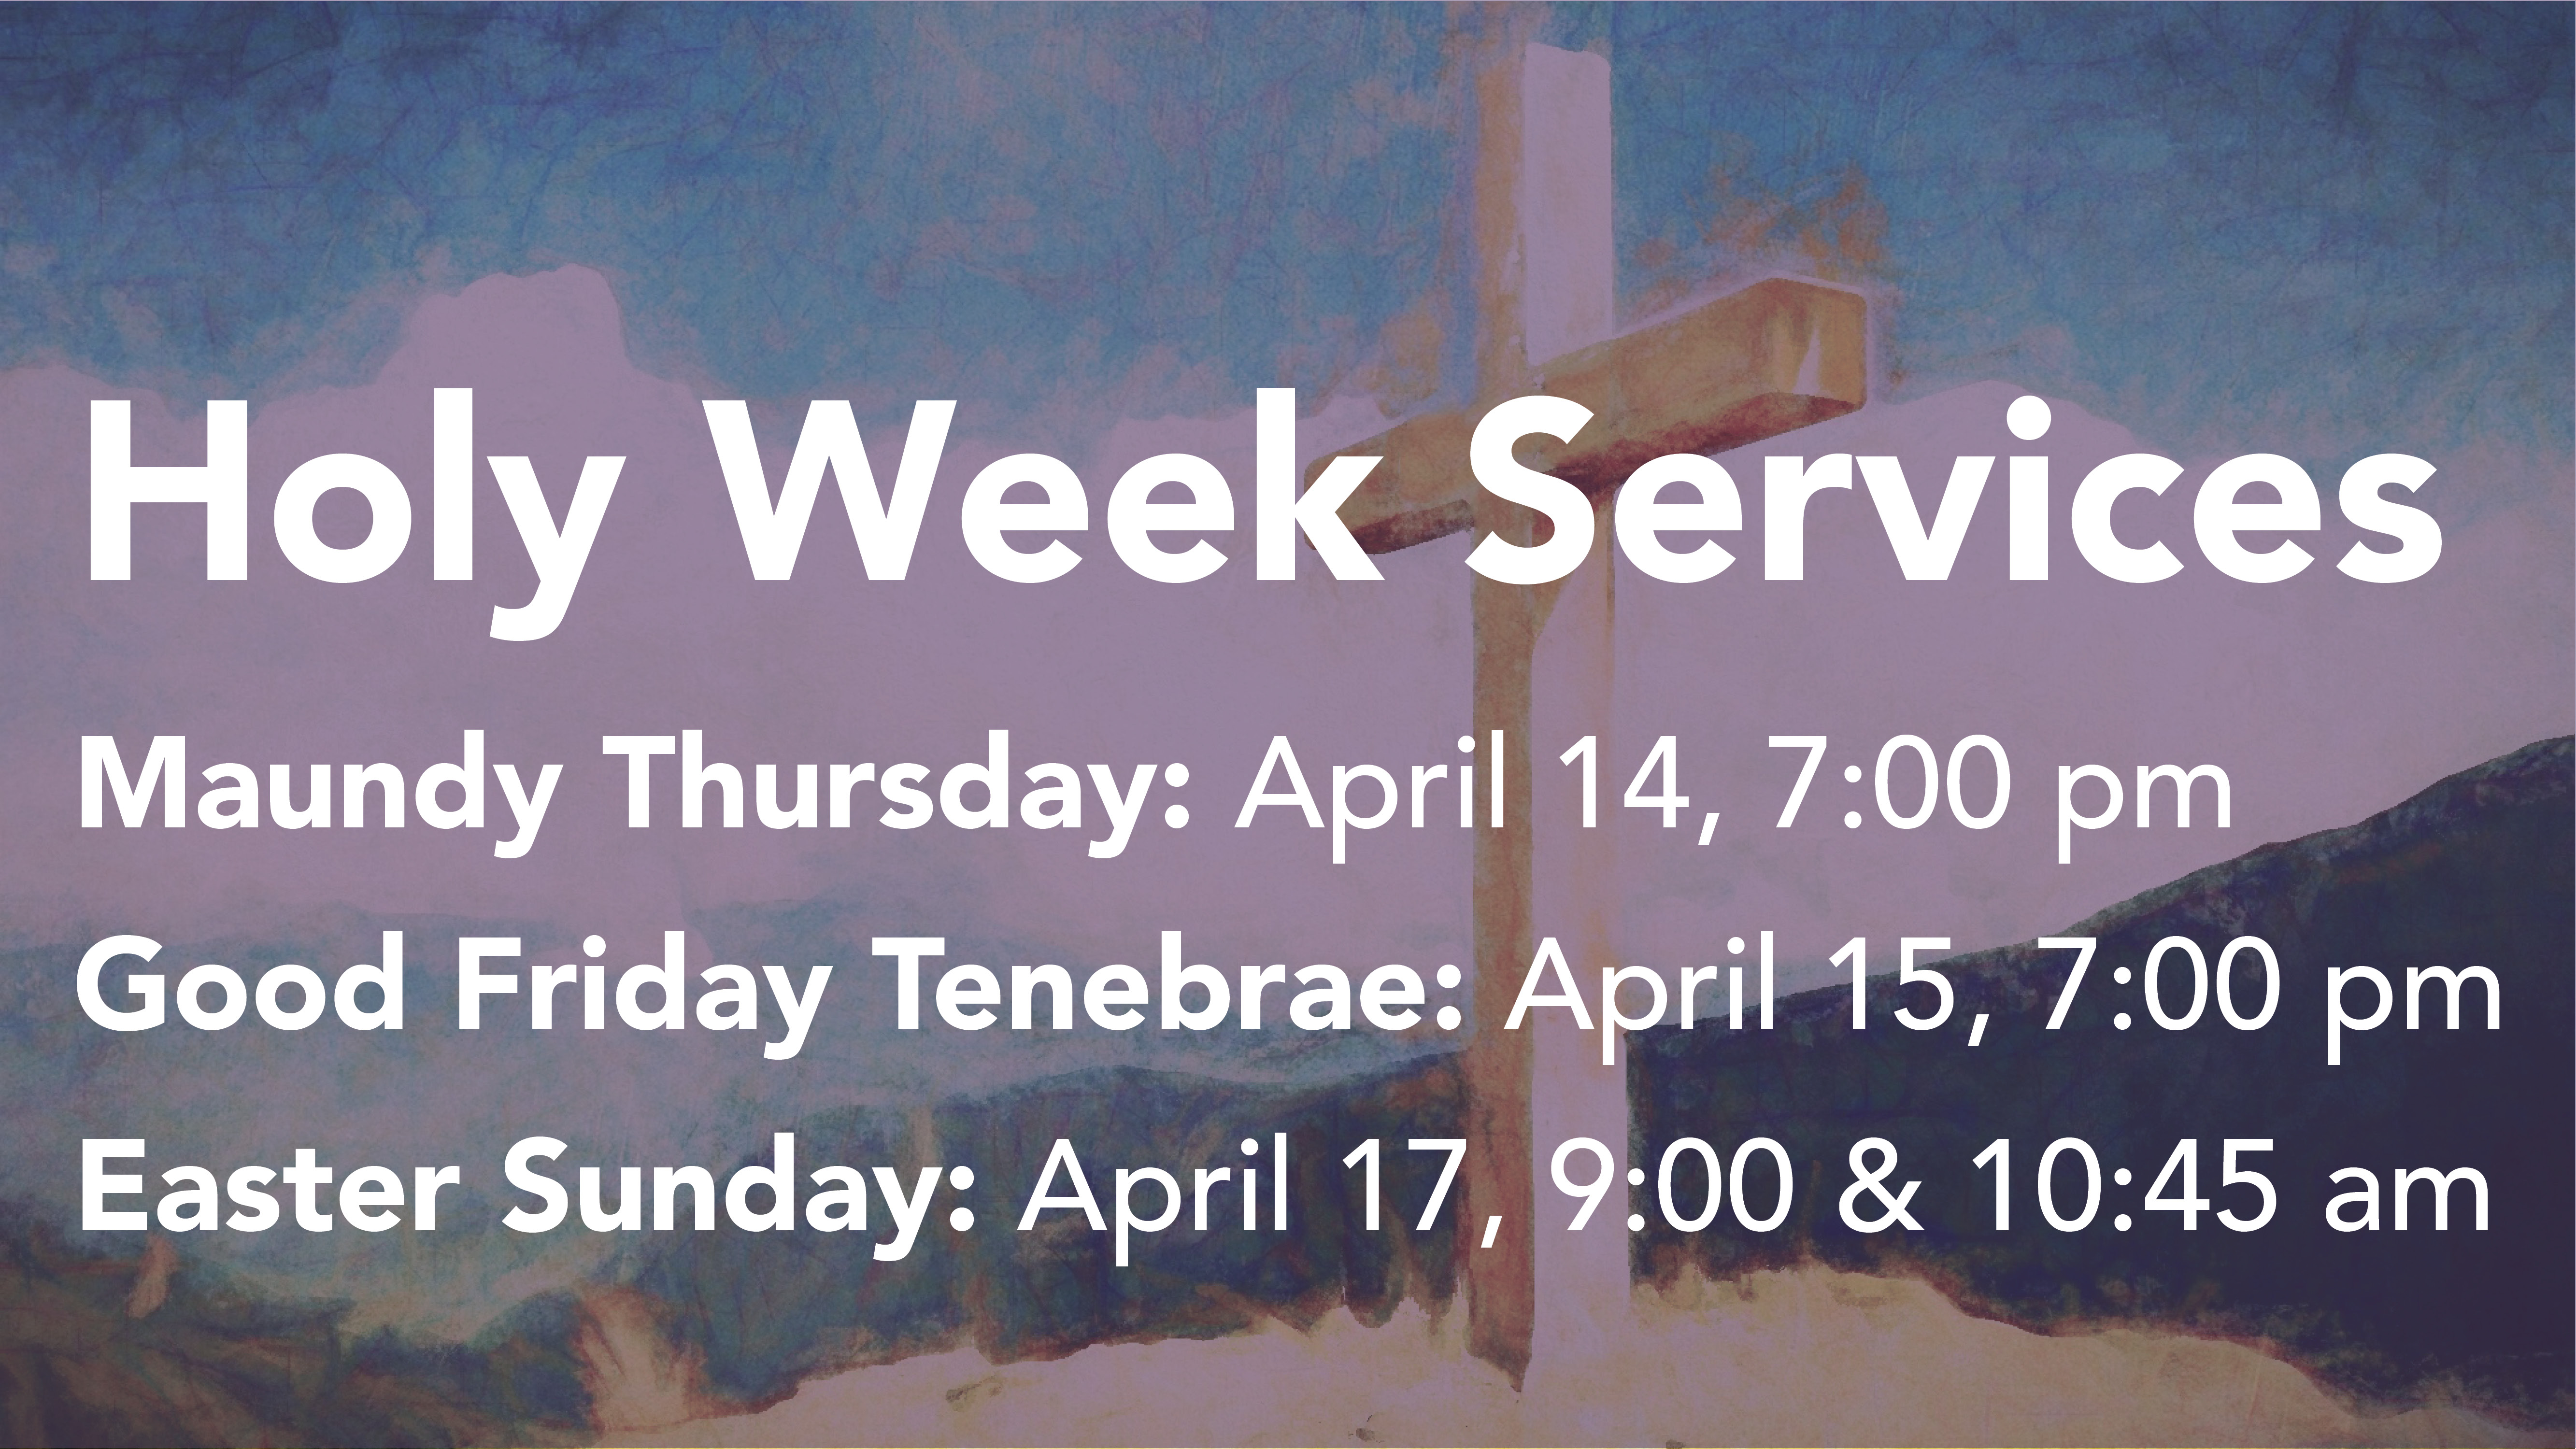 Announcement slide - Holy Week Services